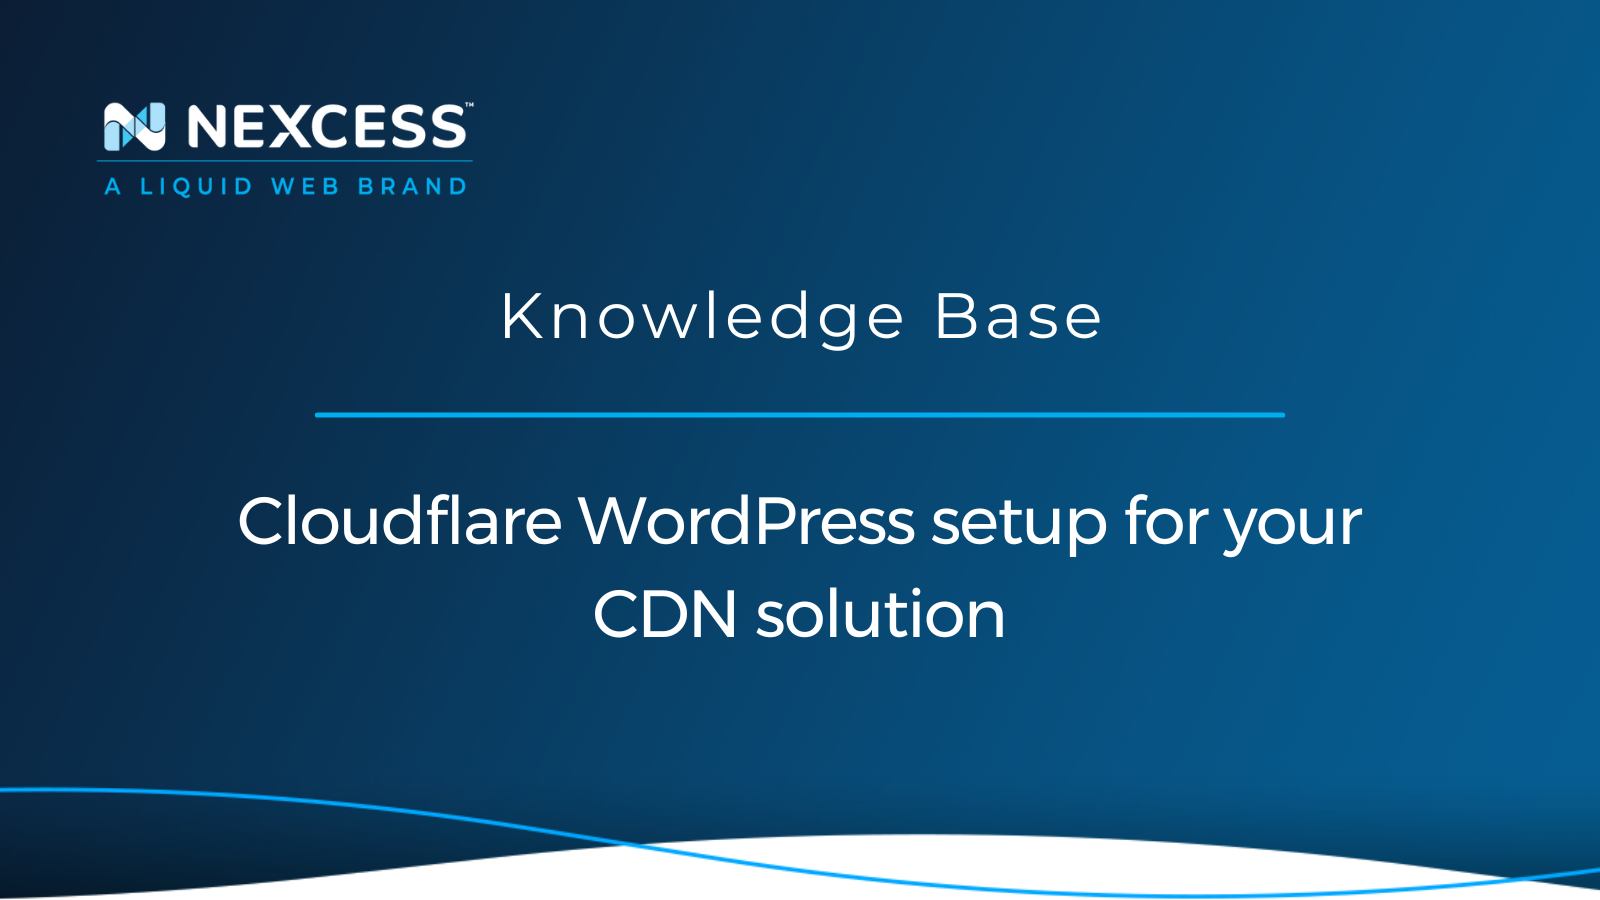 Cloudflare WordPress setup for your CDN solution